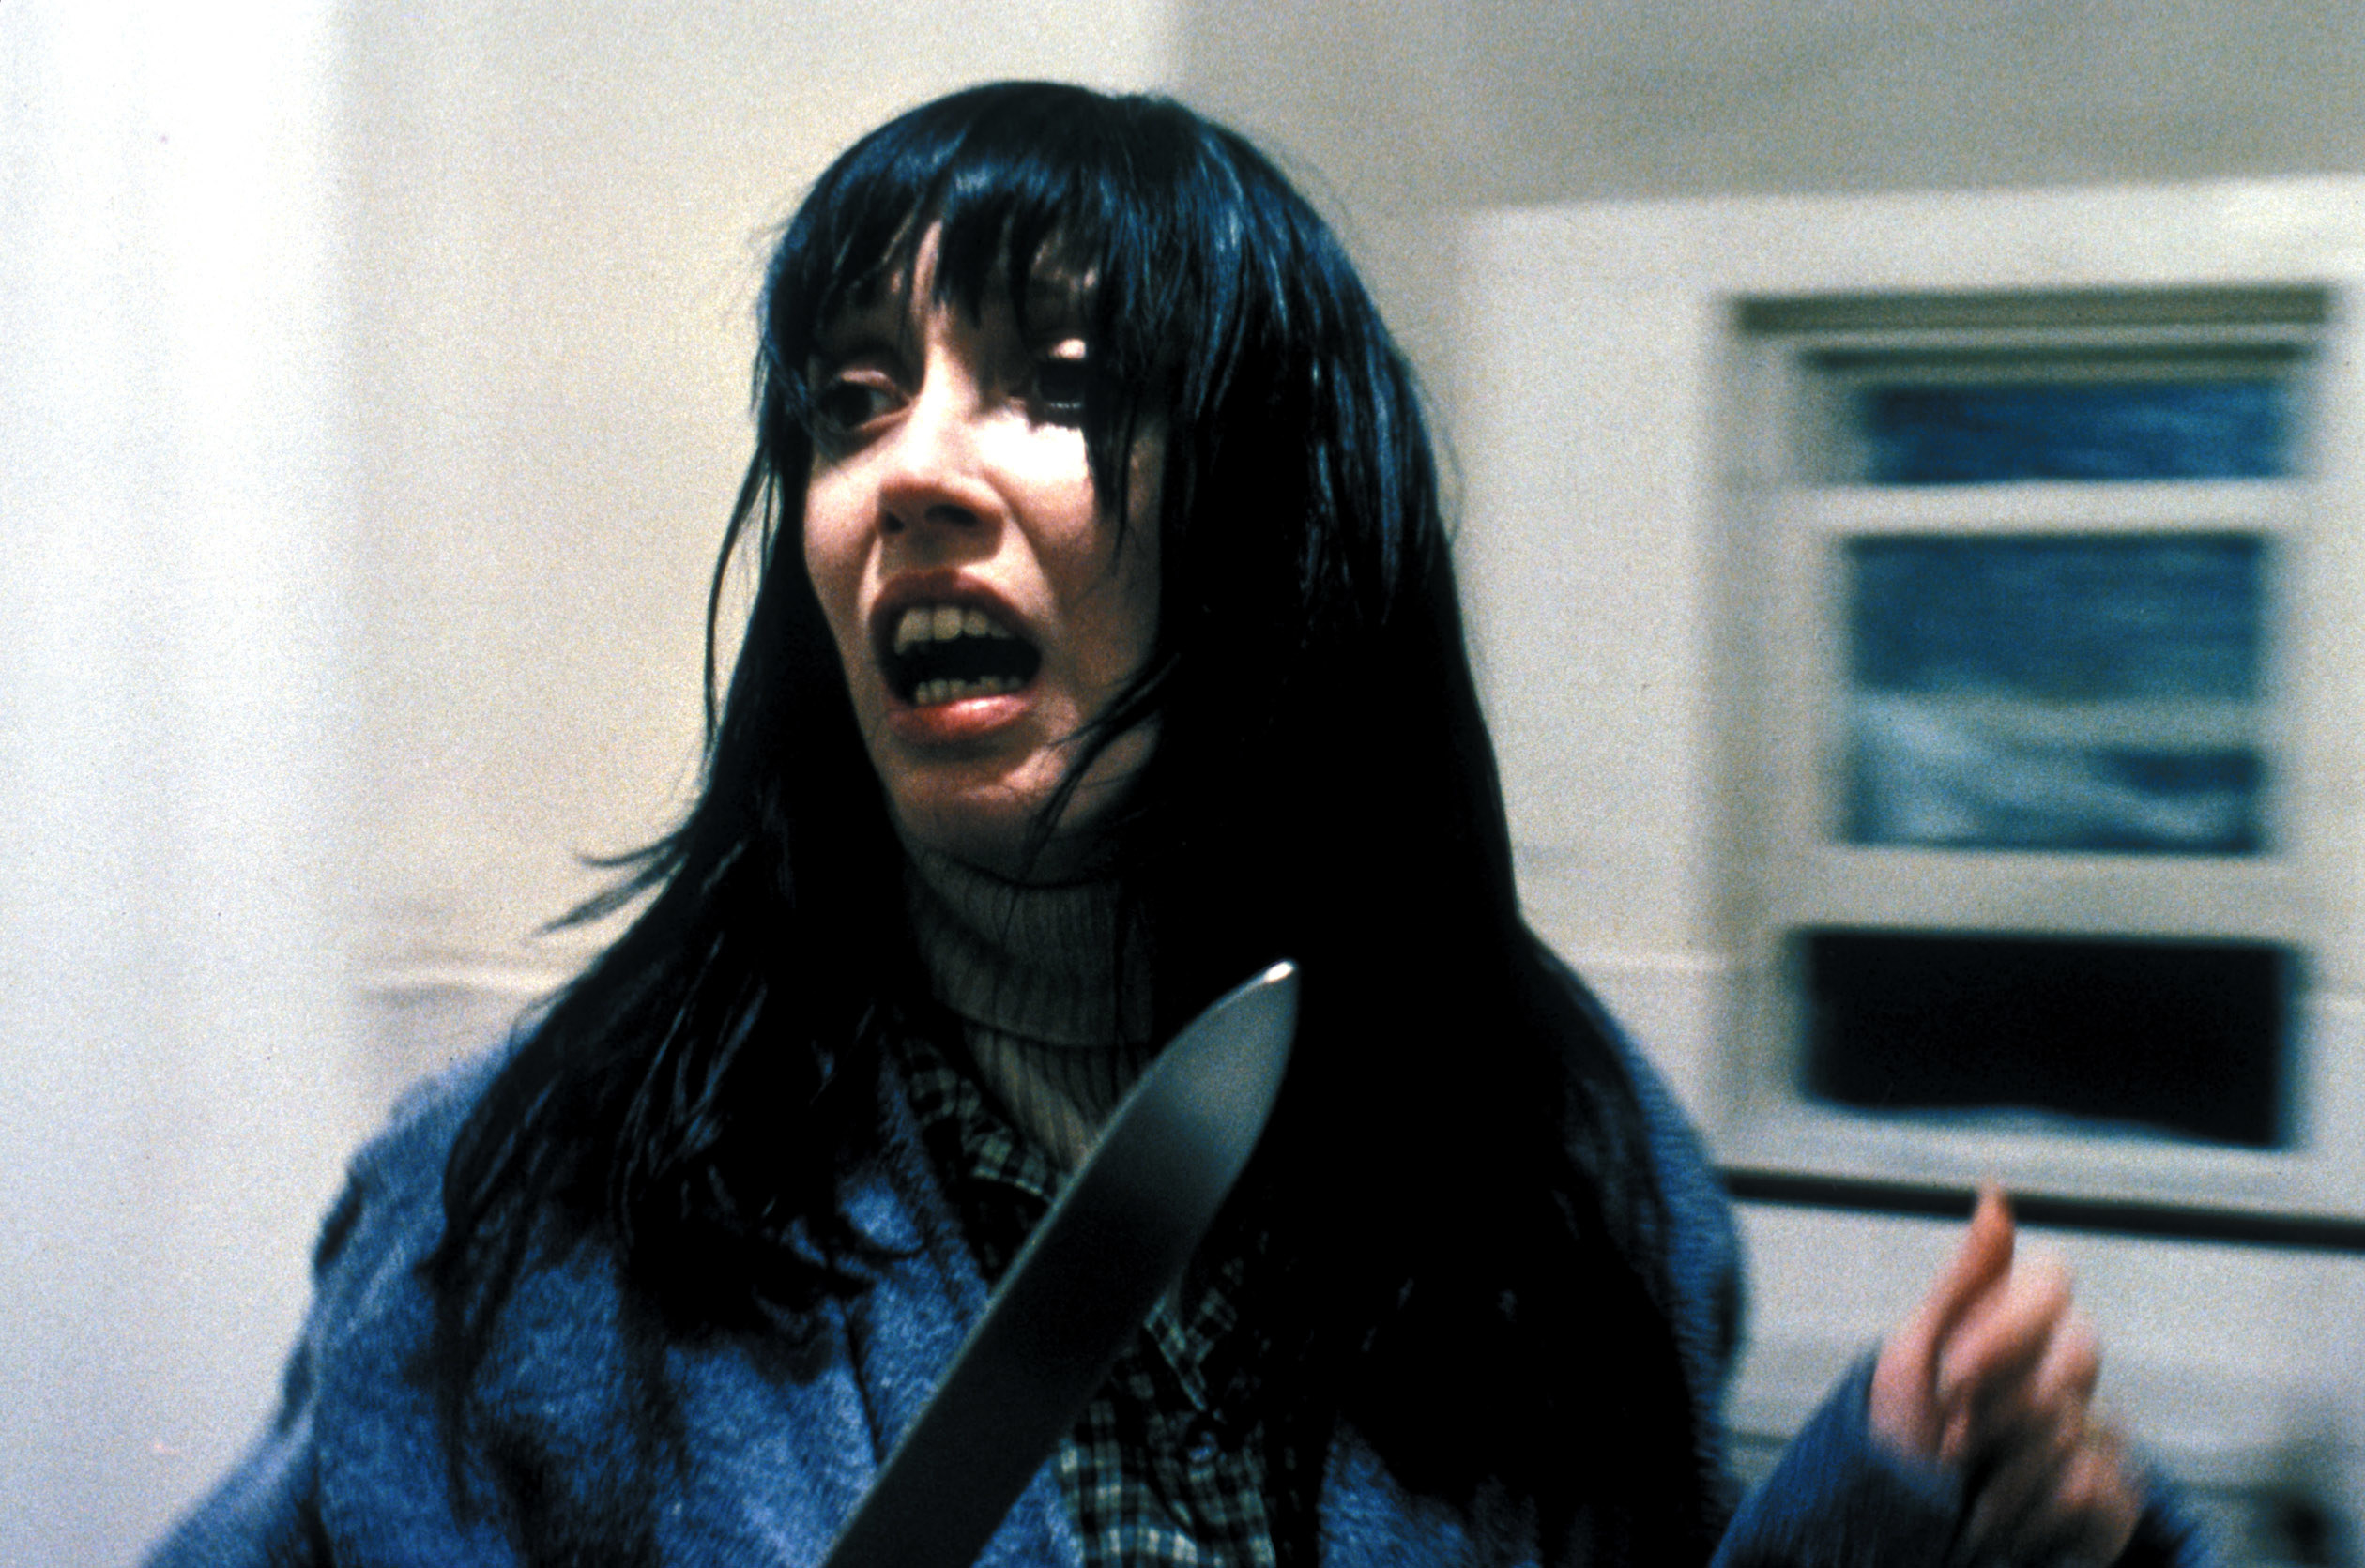 Shelley with a knife looking scared in the film